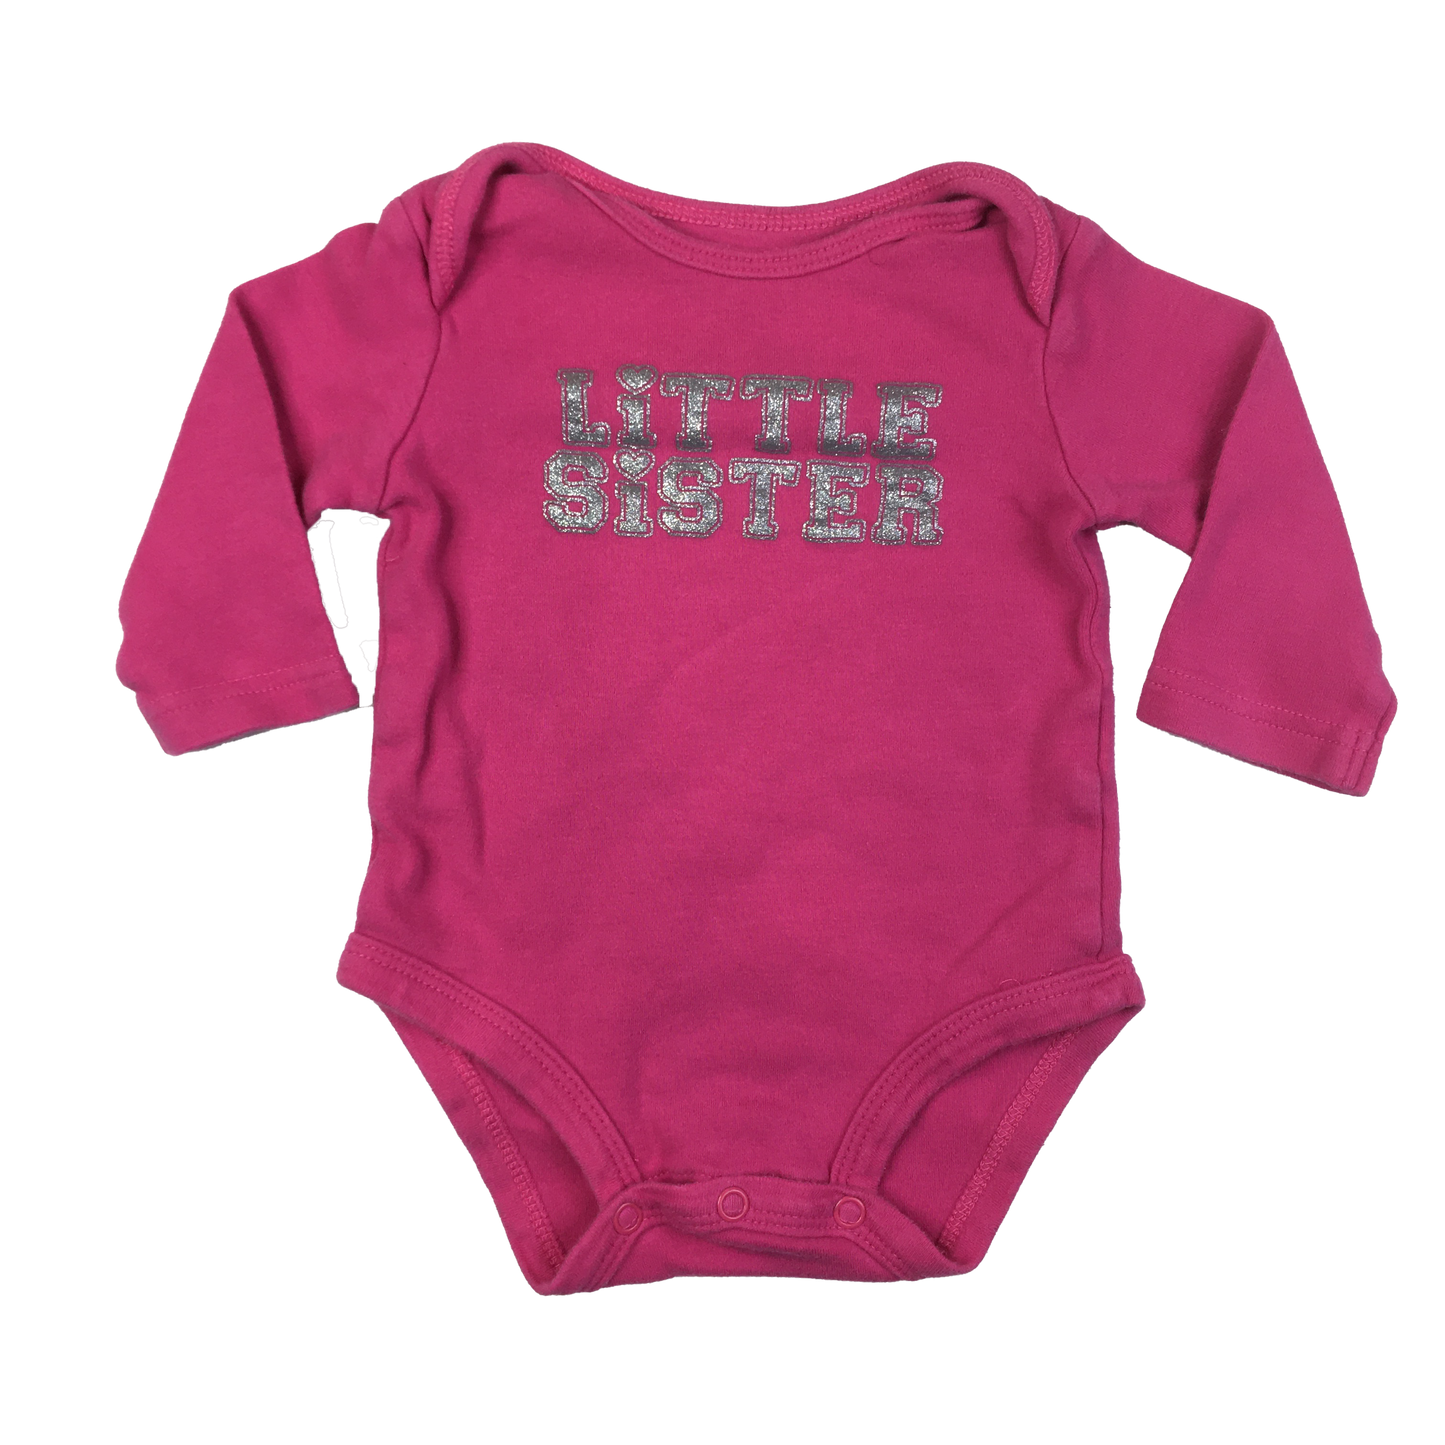 Carter's Pink Long Sleeve Onesie with "Little Sister" 6M